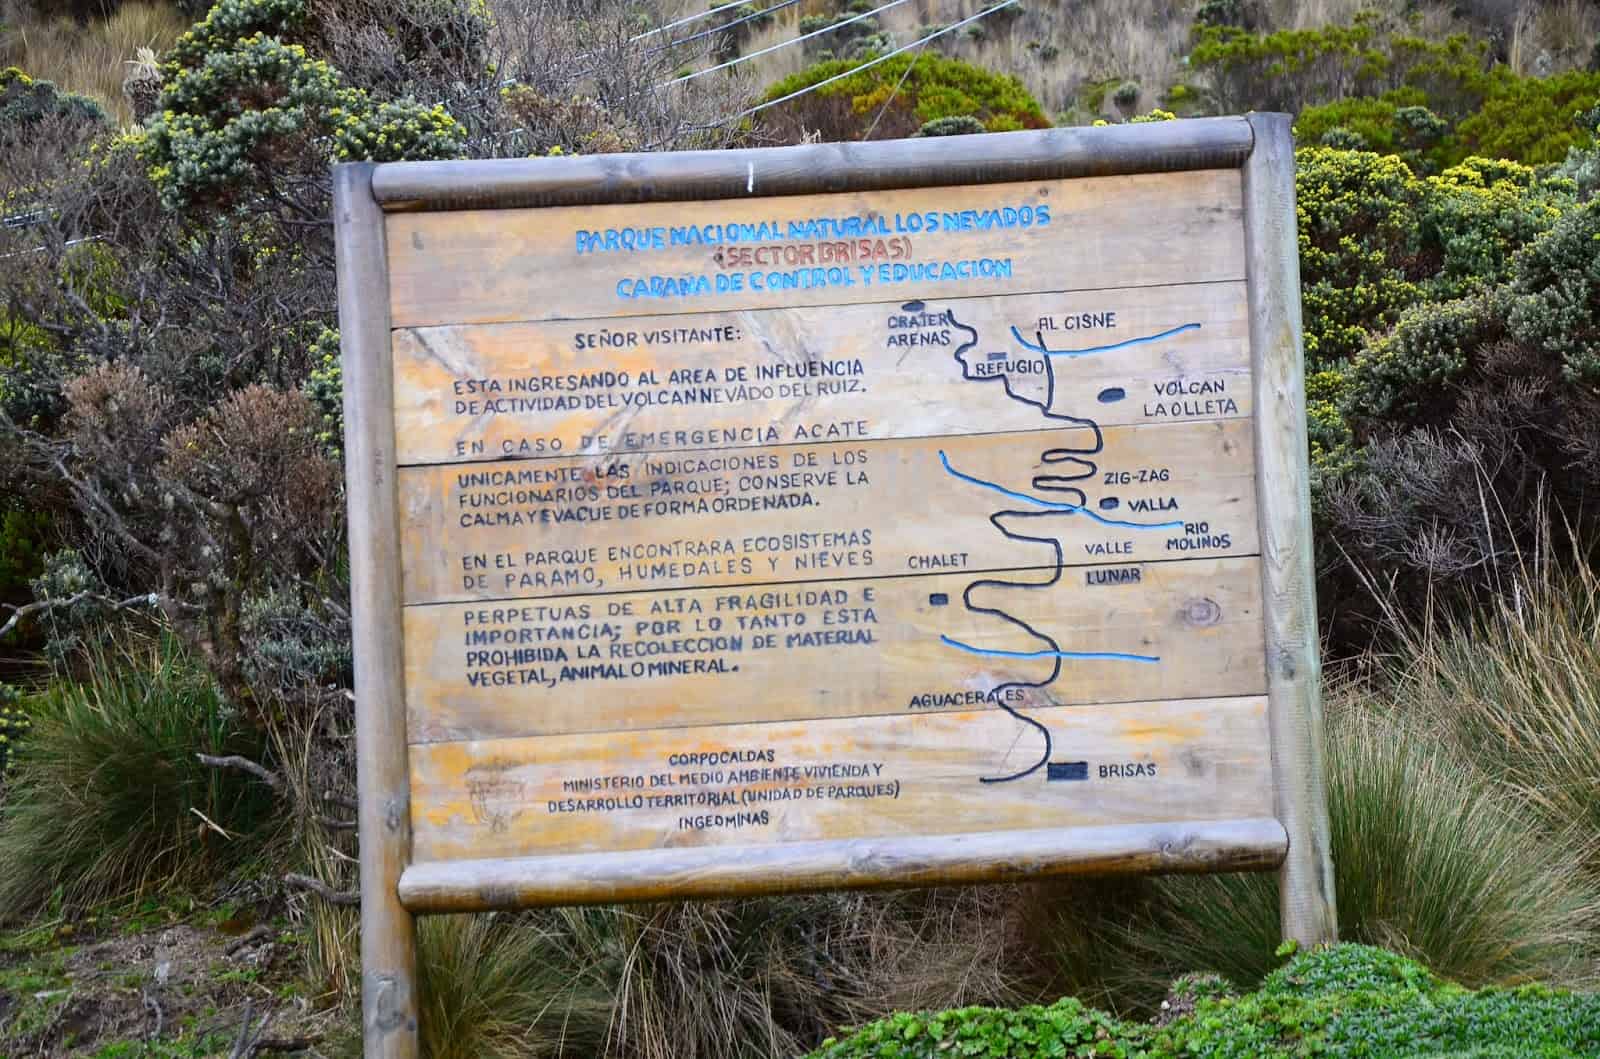 Sector Brisas sign at Los Nevados National Park in Colombia